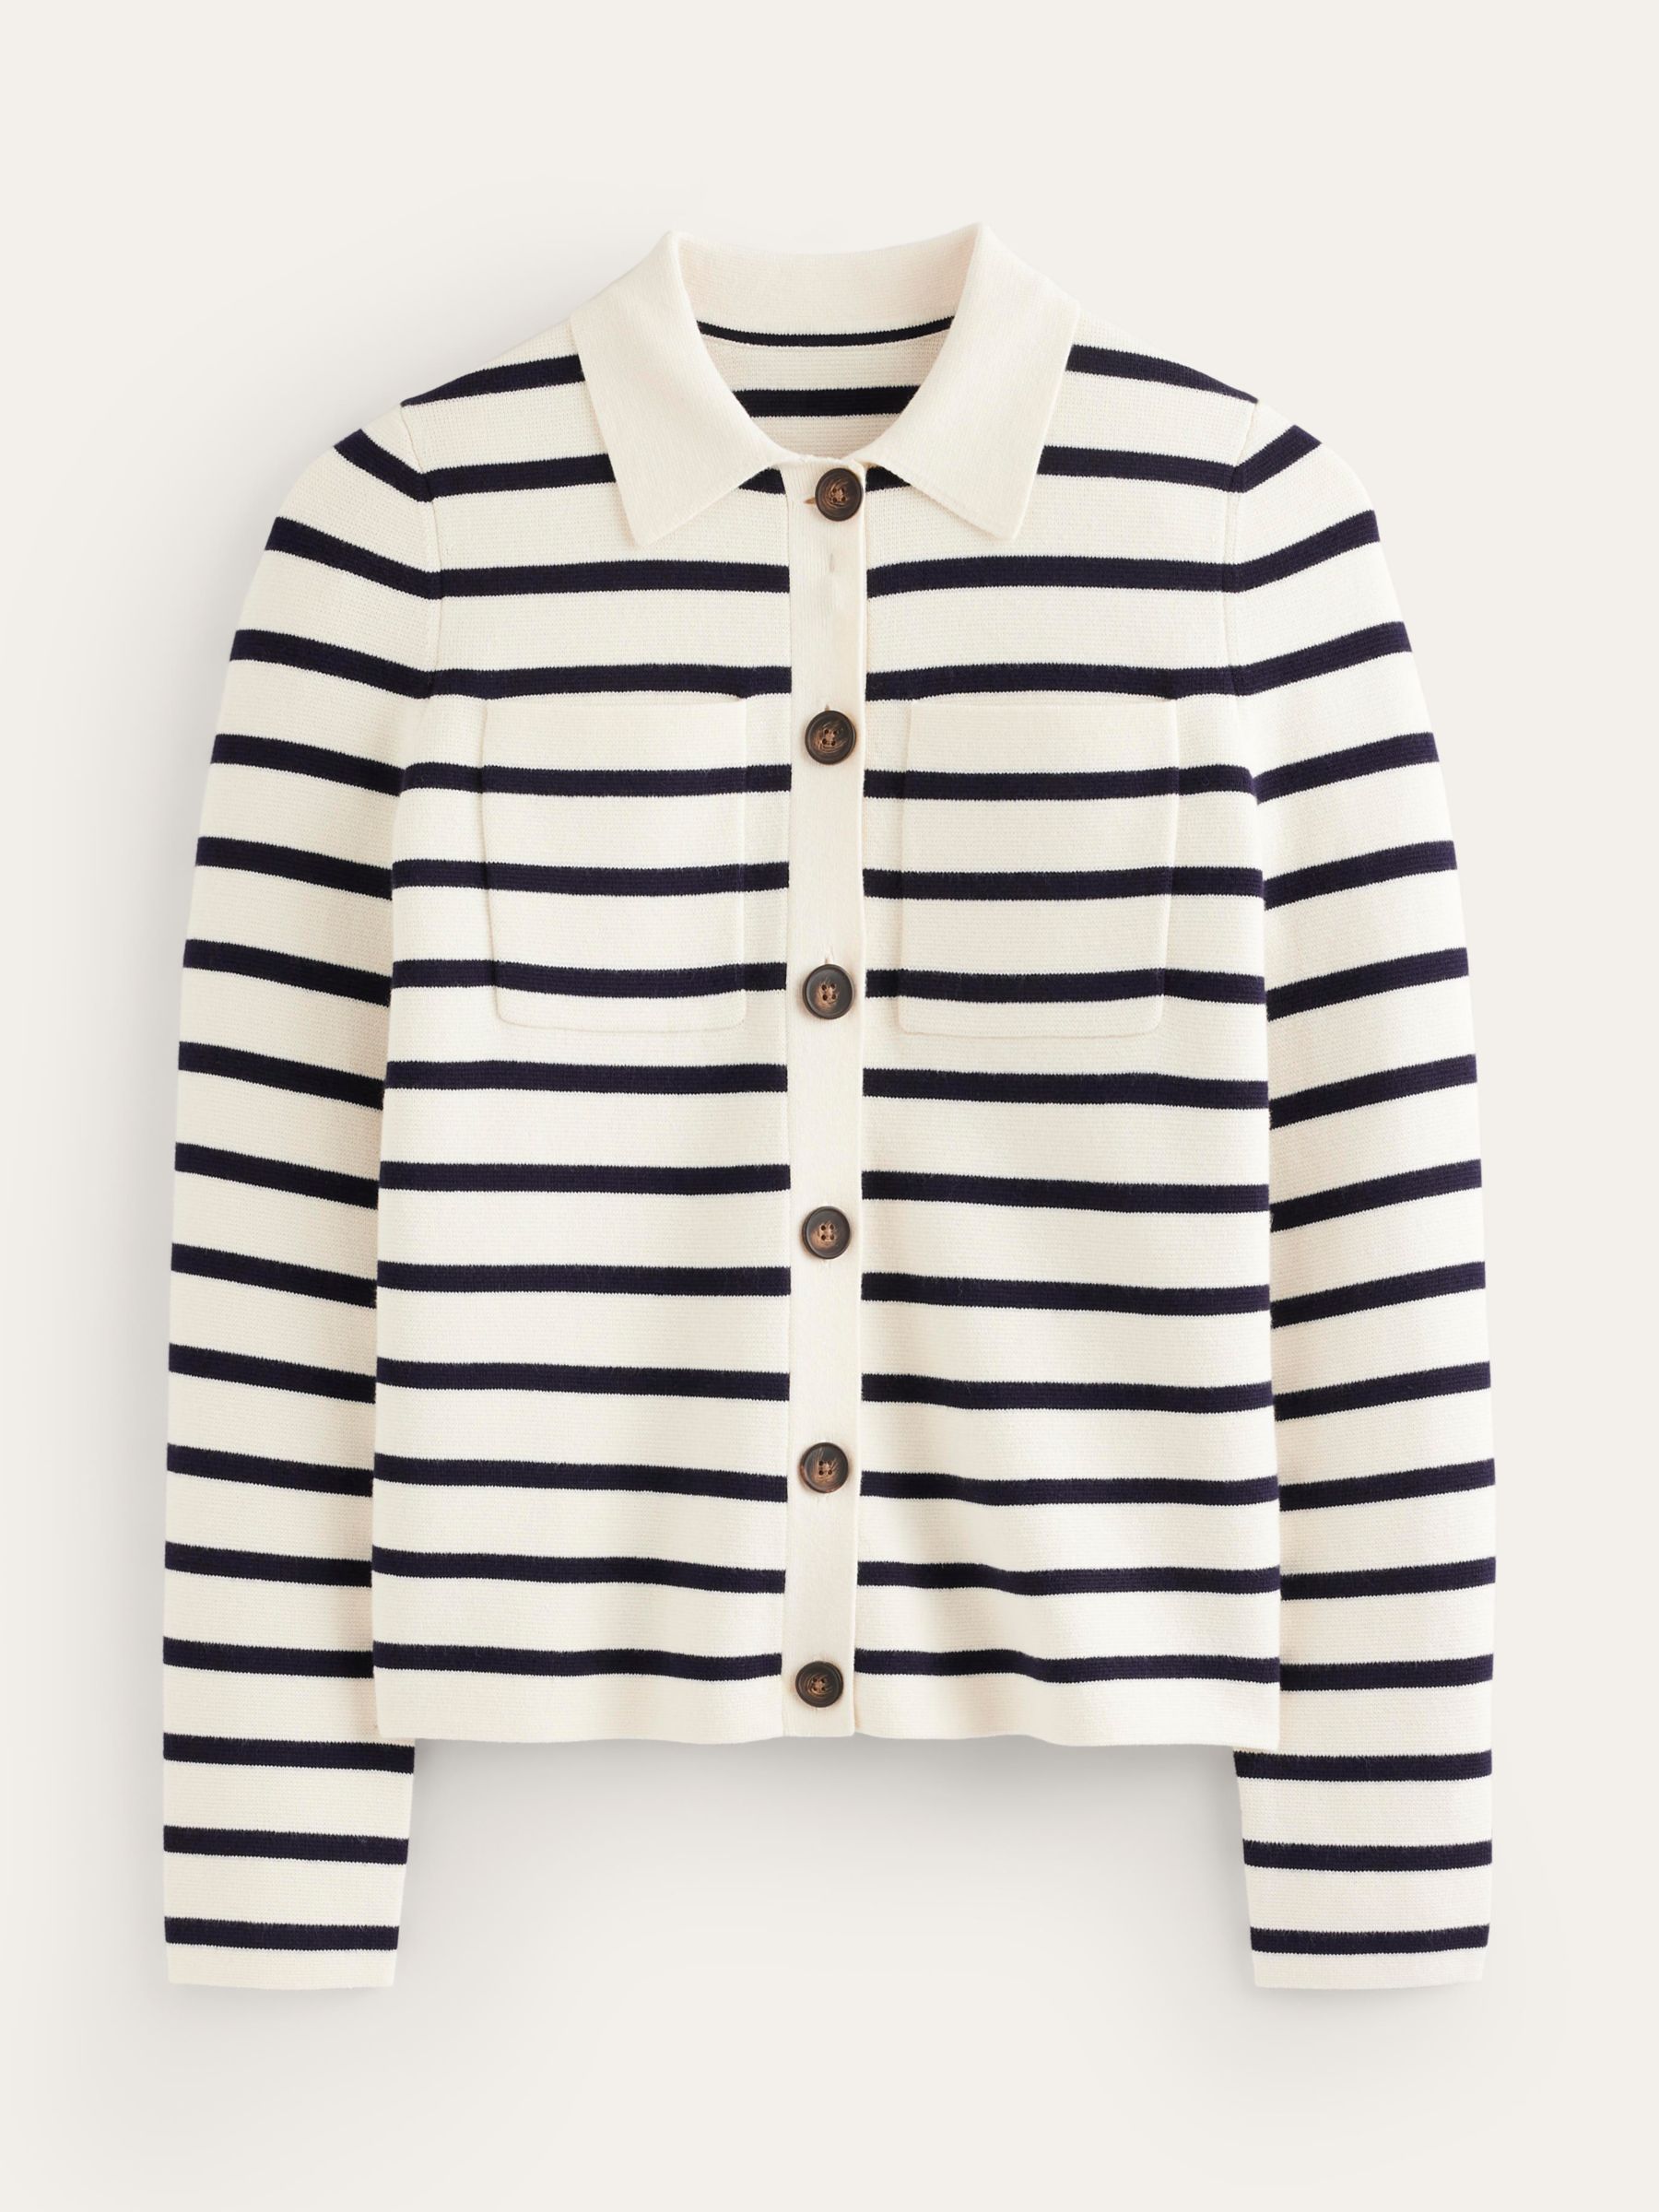 Boden Wool Blend Knitted Cardigan, Warm Ivory/Navy, S